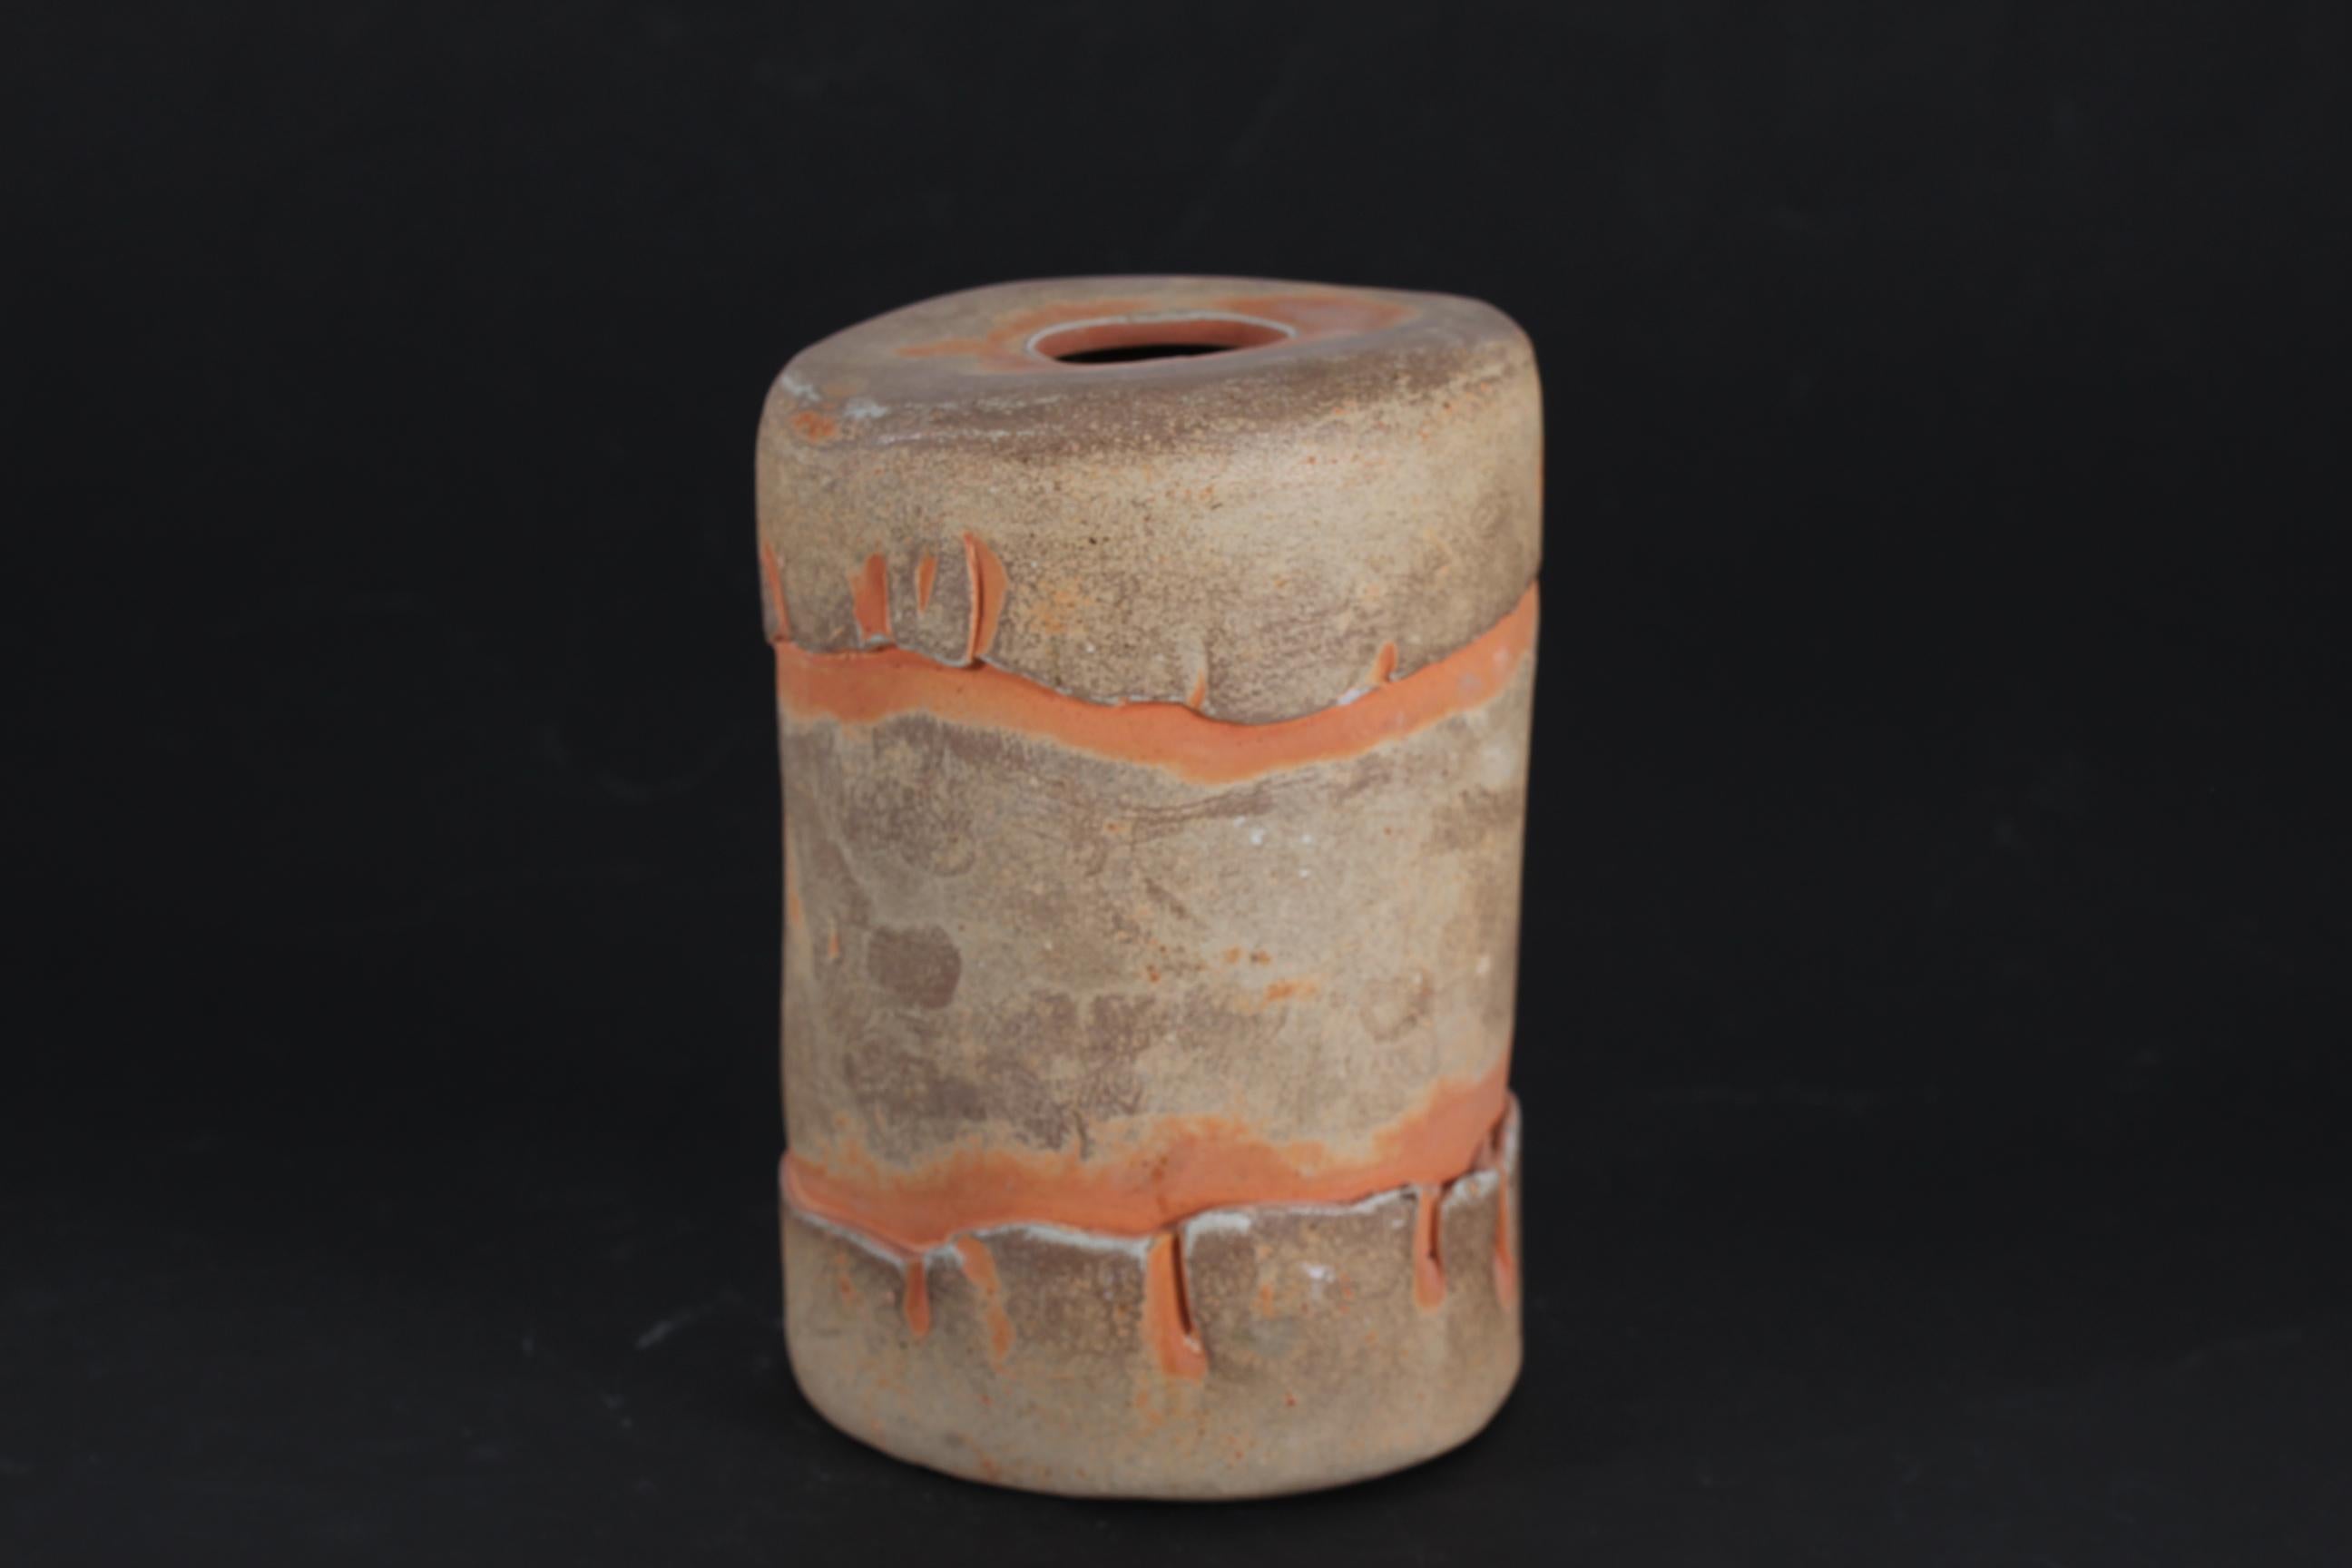 Sculptural ceramic vase made by the German-Swedish-Danish ceramist Richard Manz (1933-1999). The husband of the Danish ceramist Bodil Manz.
The rustic almost cylindrical vase is decorated with matte earthen colors

Sign. Richard Manz

Nice